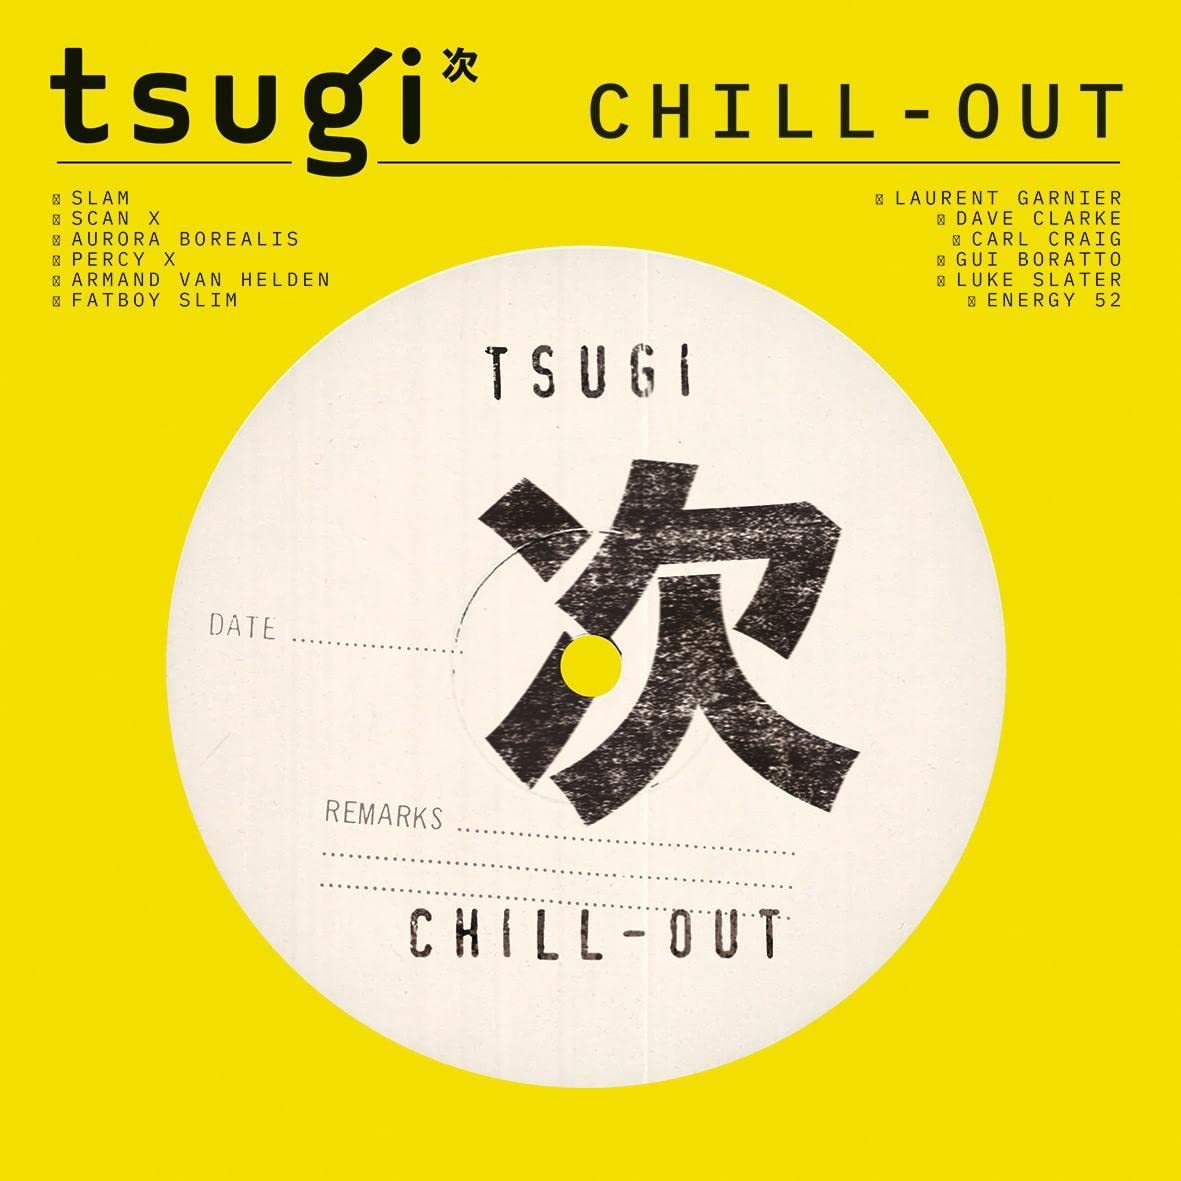 Chill Out (Collection Tsugi) [Vinyl LP]